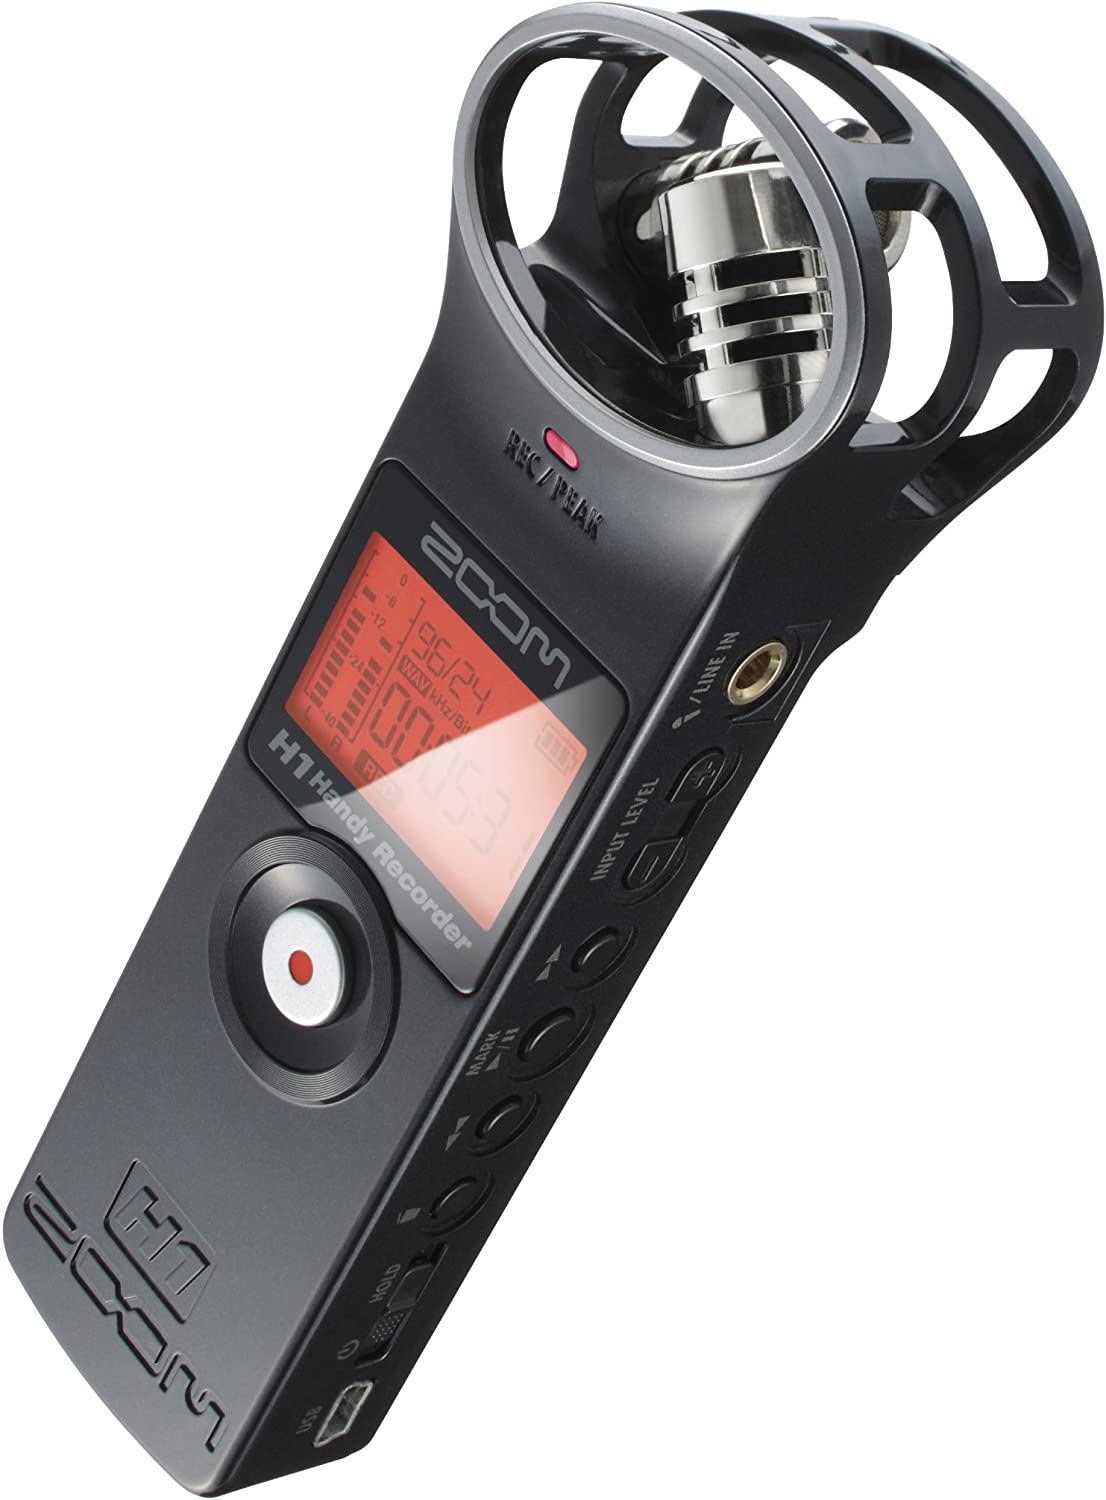 Zoom H1 Recorder Product Image New Voices Nour Allam First Gadget in Studio